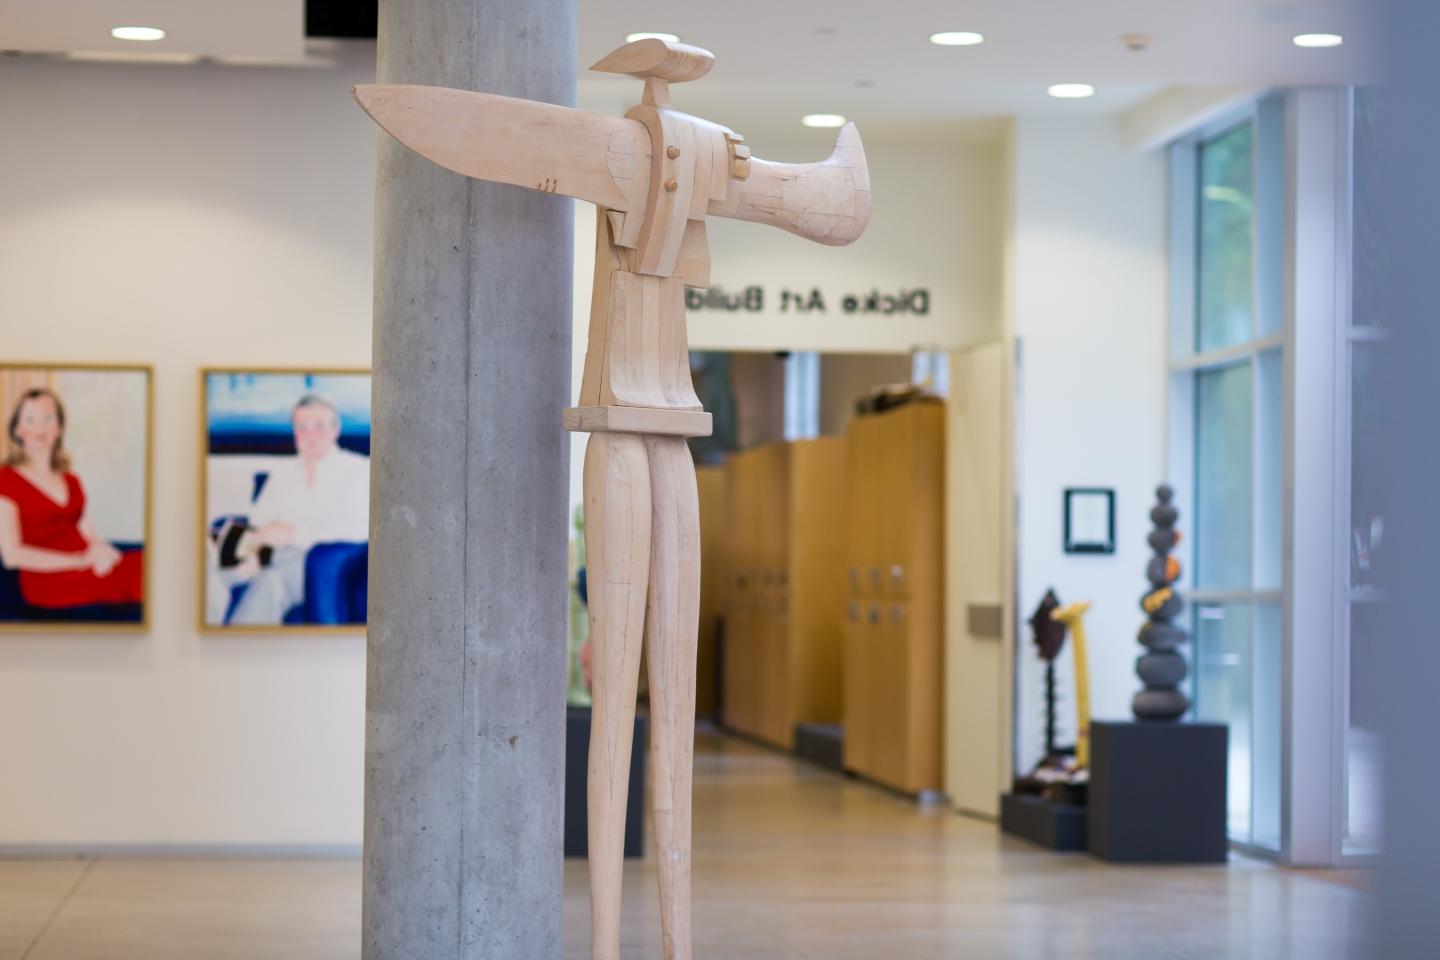 Wooden sculpture from the Everette art installation inside the Dicke art building